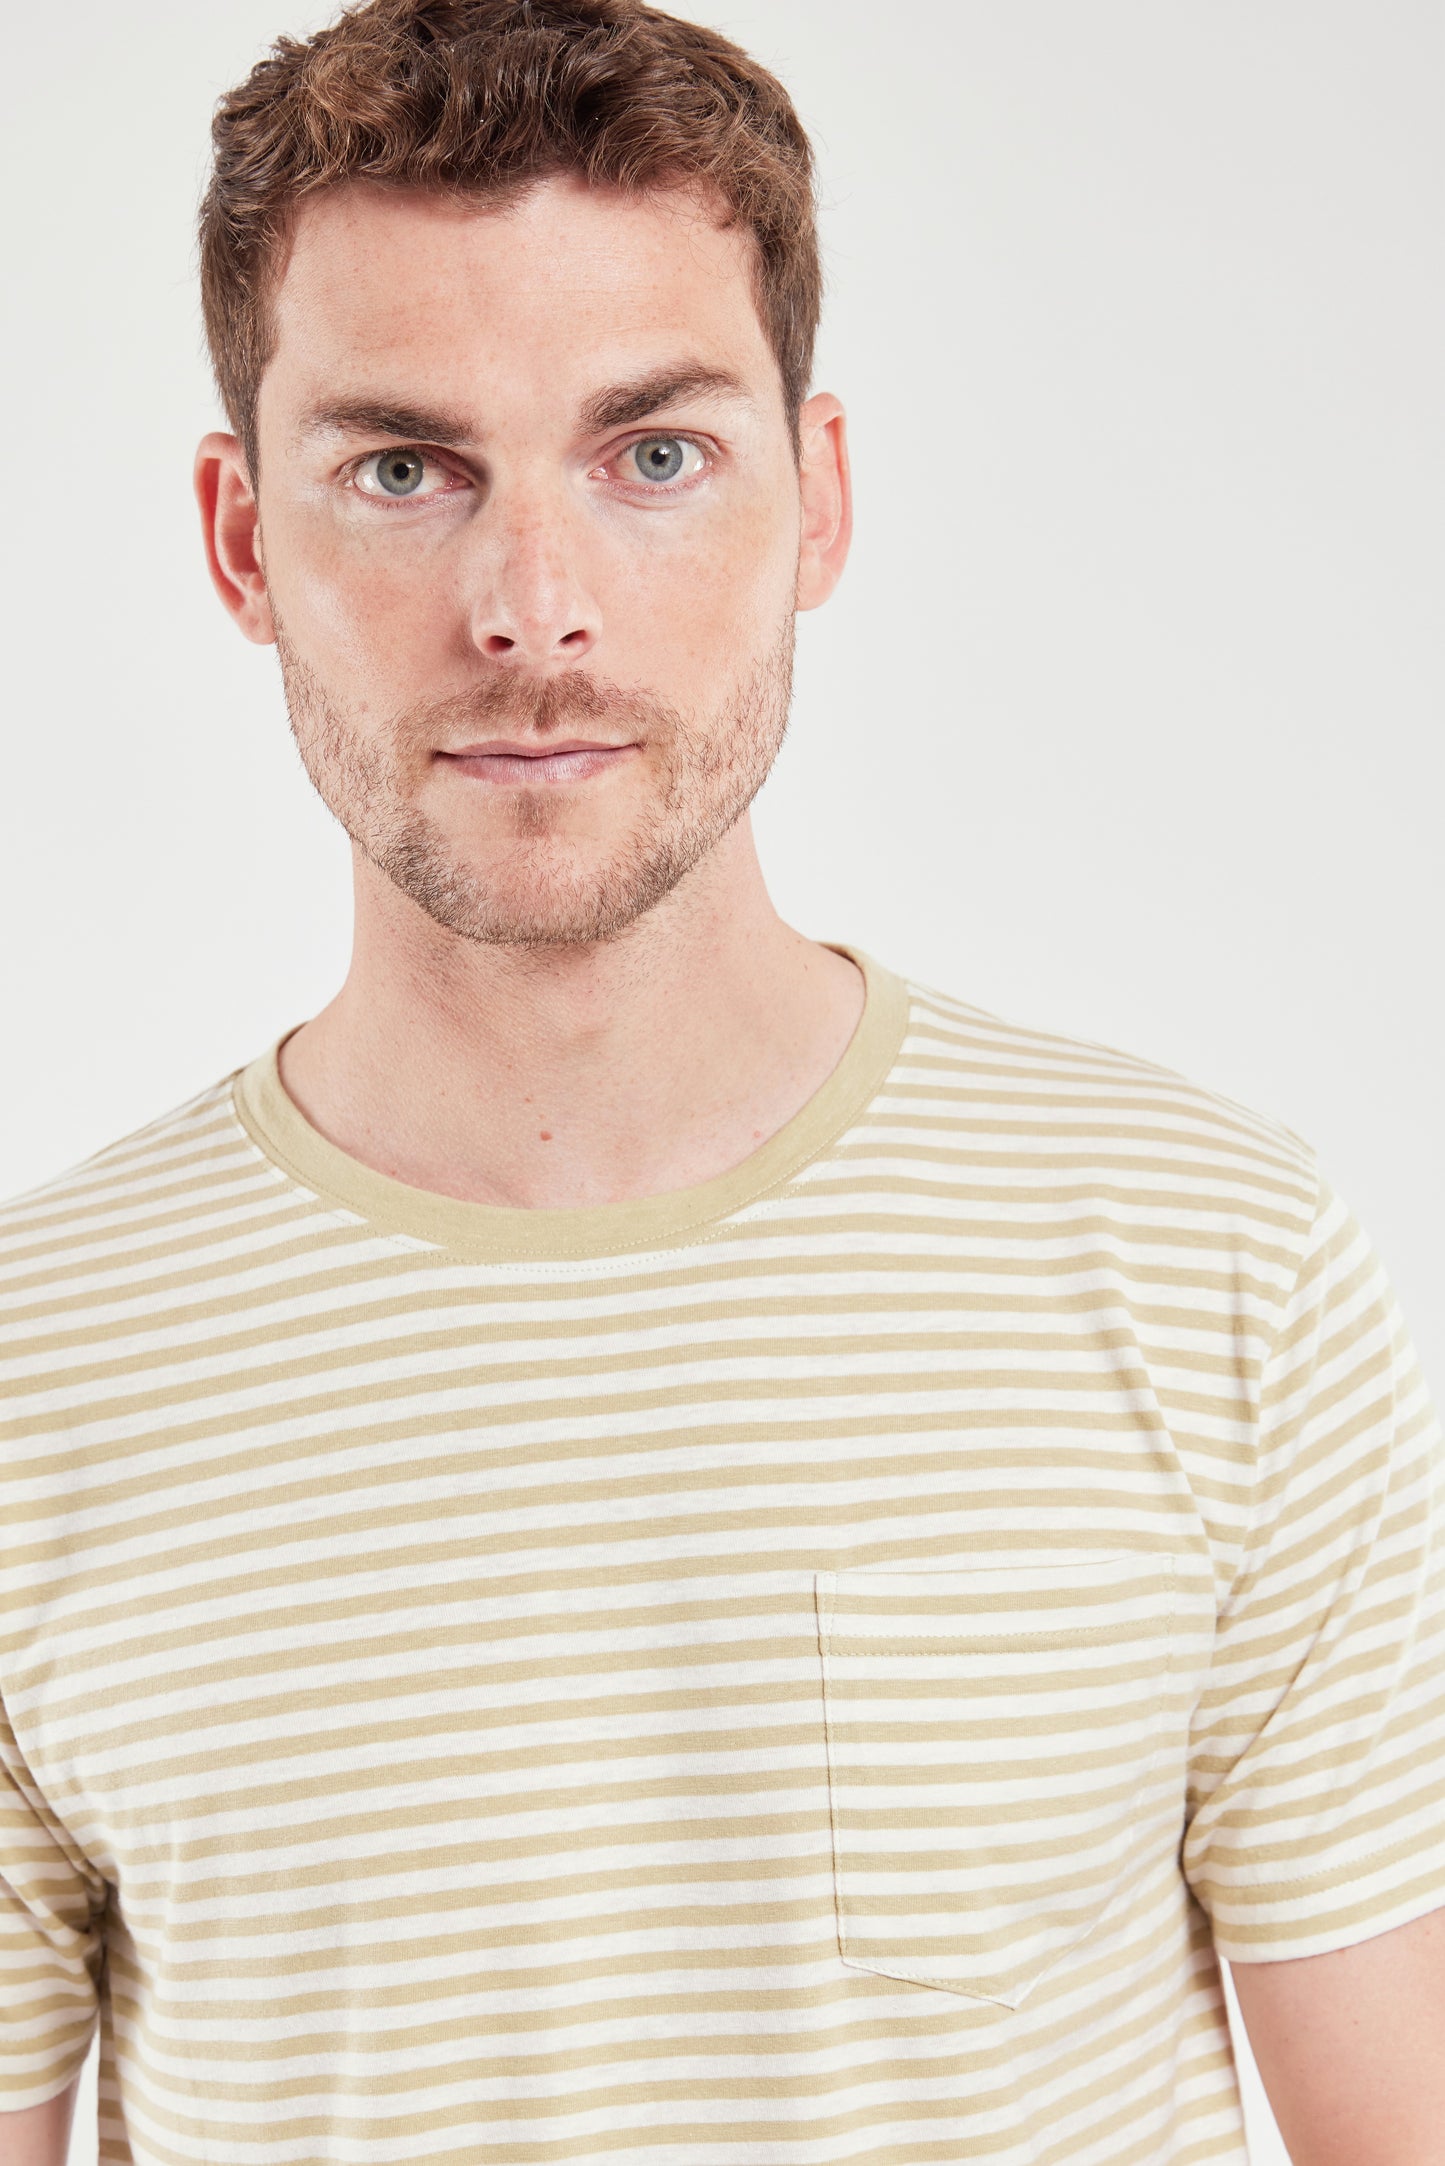 Armor Lux Heritage Short Sleeve Striped T-Shirt in pale olive and nature cream